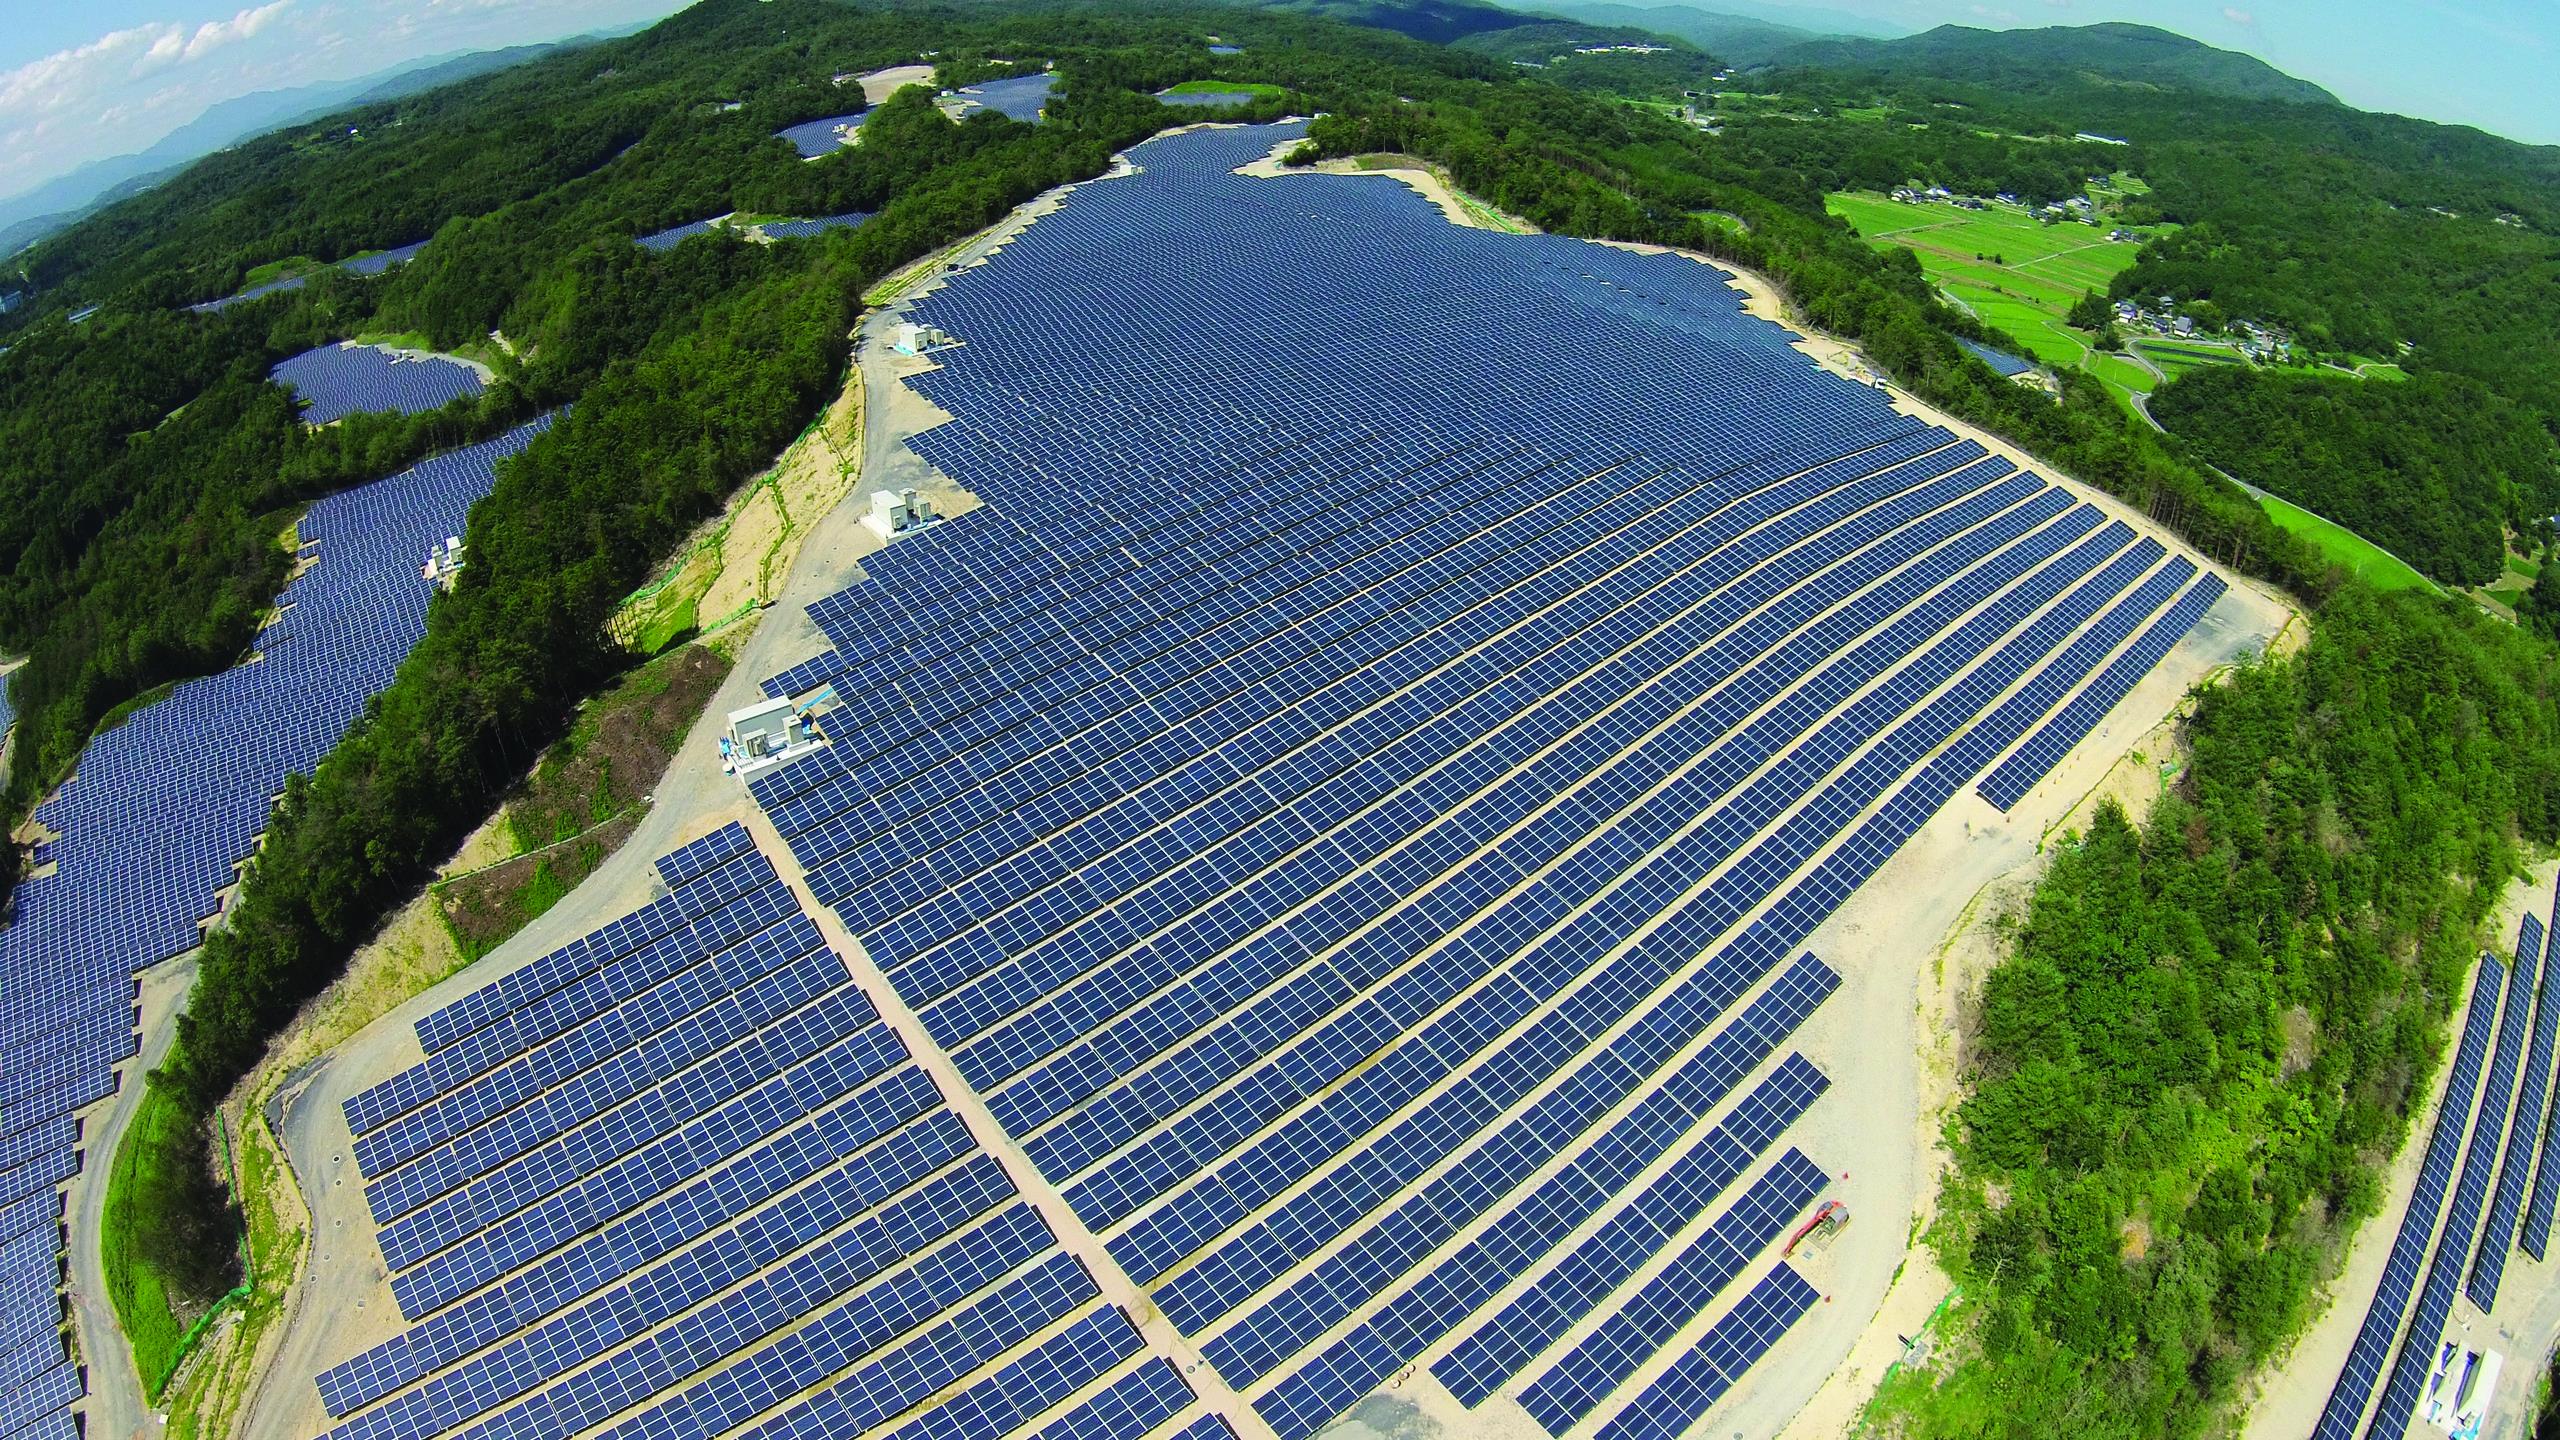 Aerial view of the Sakuto PV plant in Japan